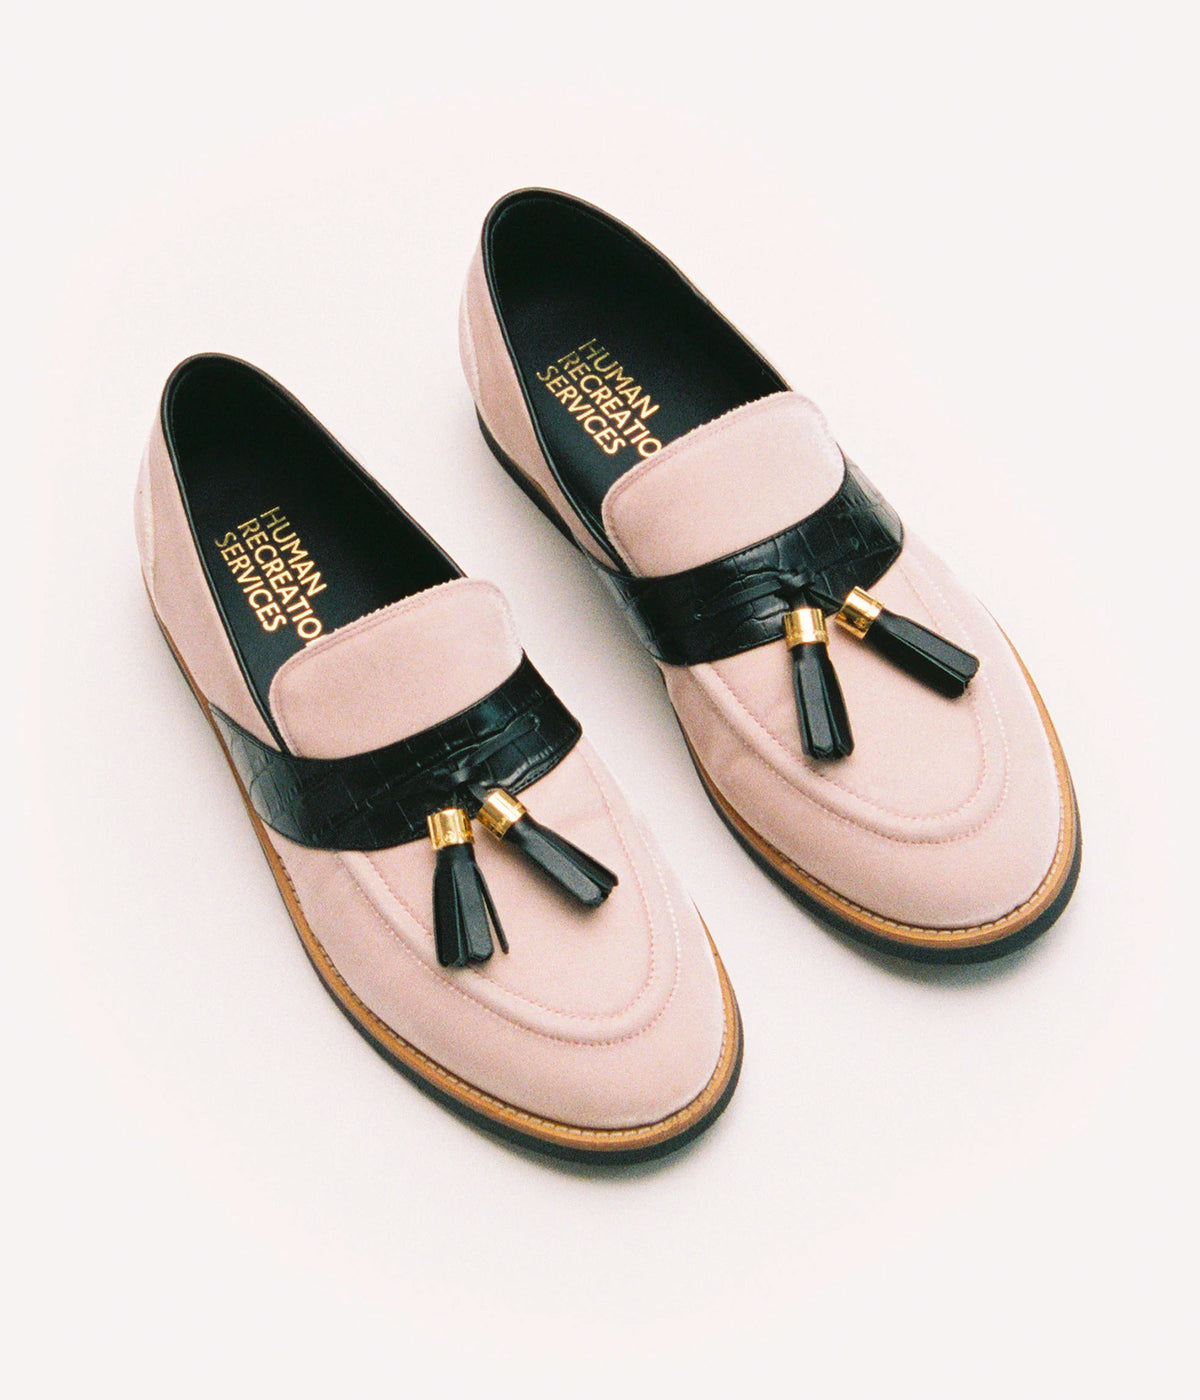 HUMAN RECREATIONAL SERVICES DEL REY TASSEL LOAFER IN PINK AND BLACK